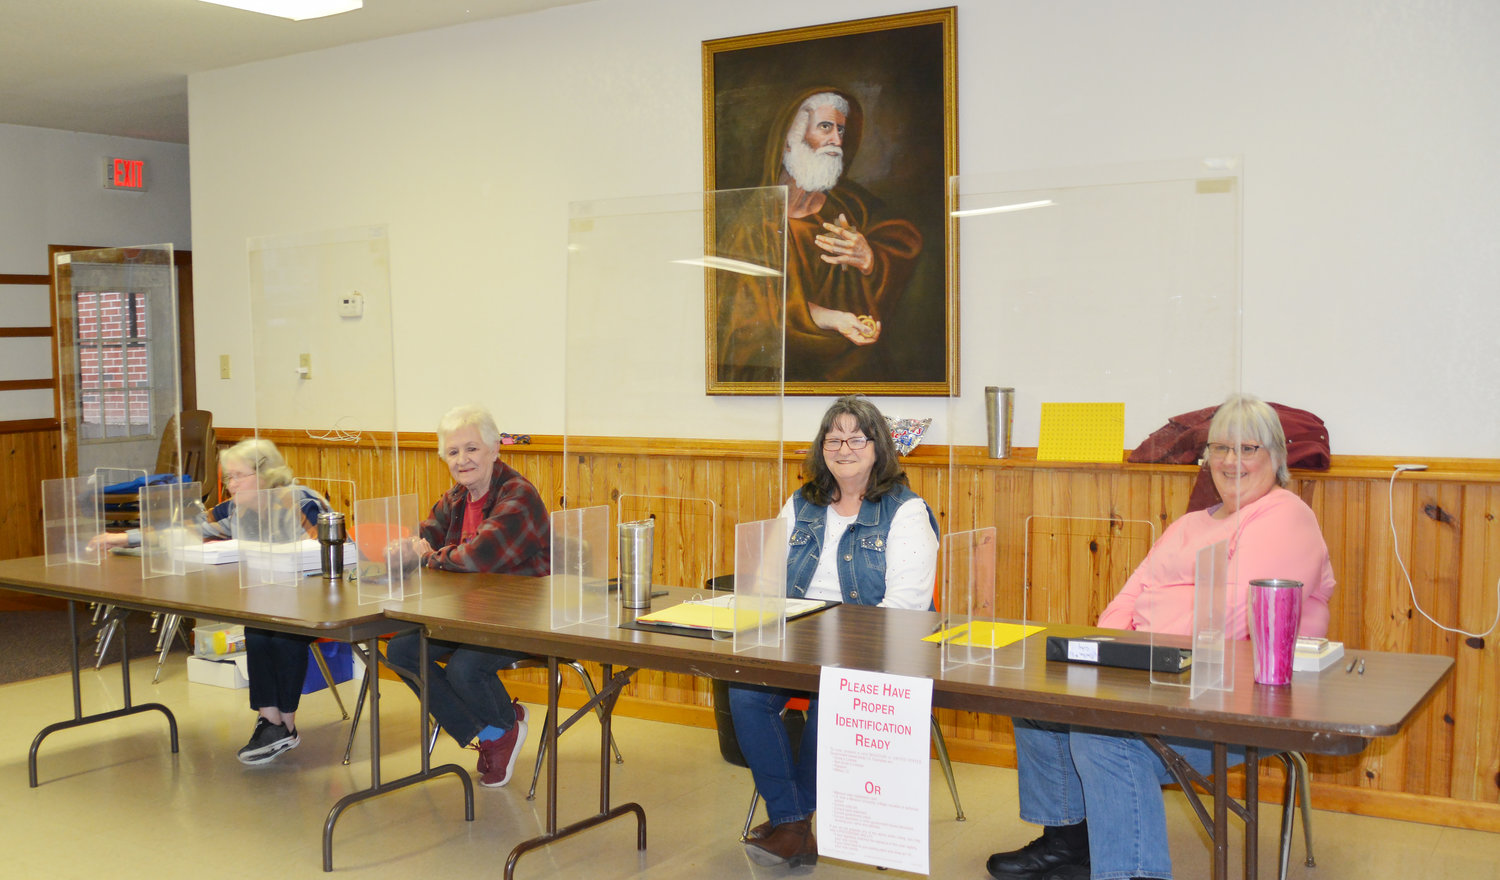 At 7:52 a.m., the Maries County Belle precinct located at St. Alexander’s Church was manned by area polling judges who reported seven votes cast.